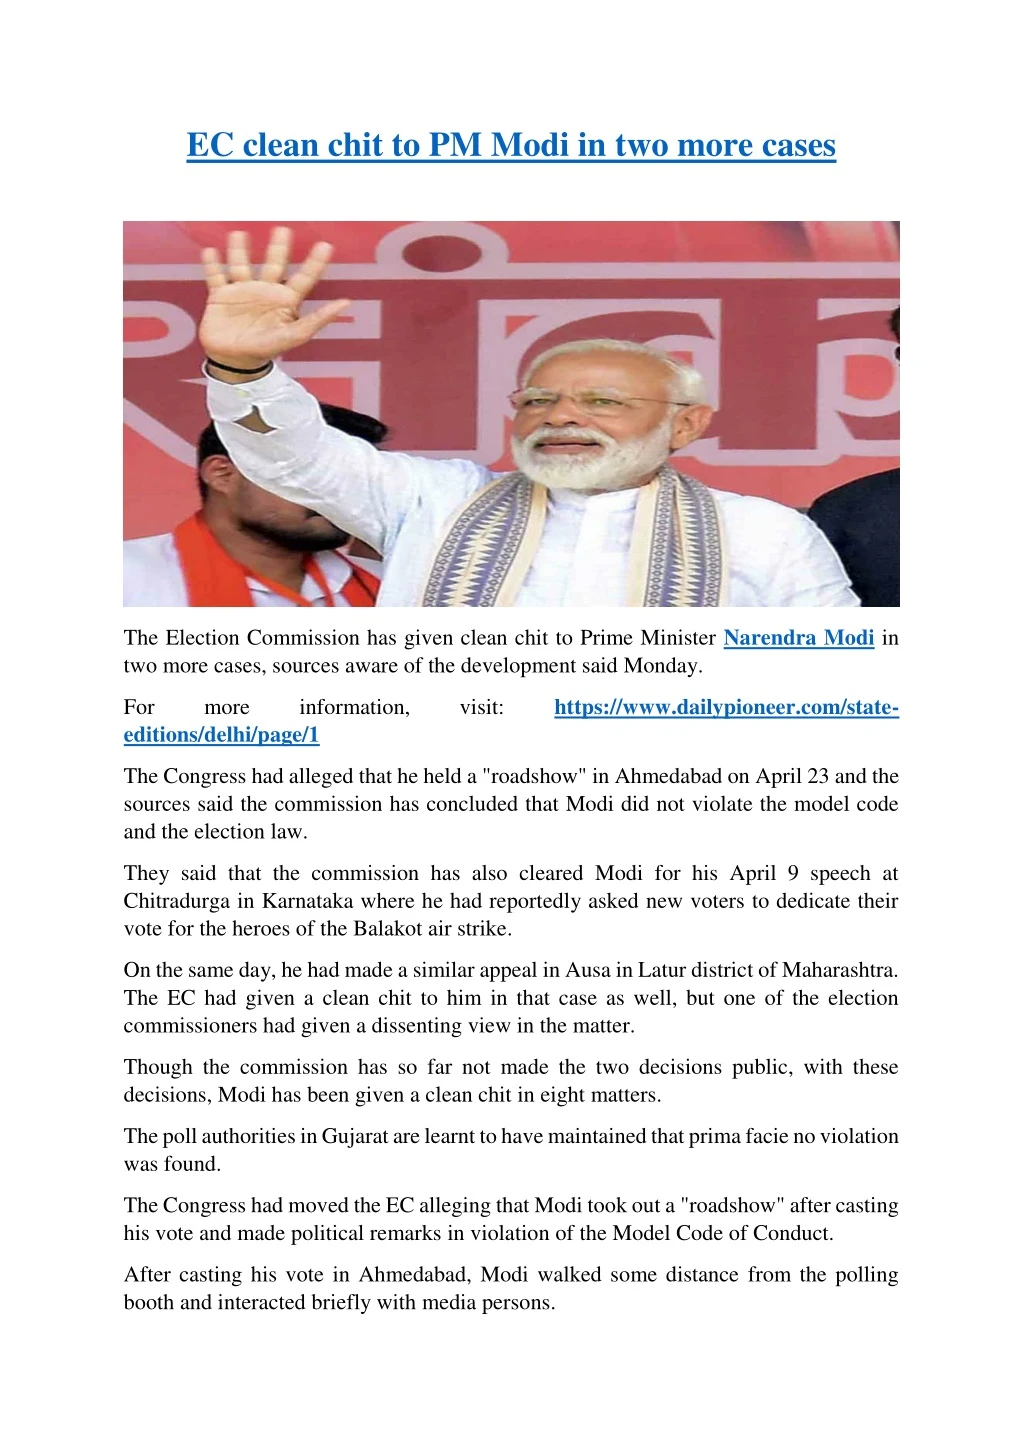 ec clean chit to pm modi in two more cases